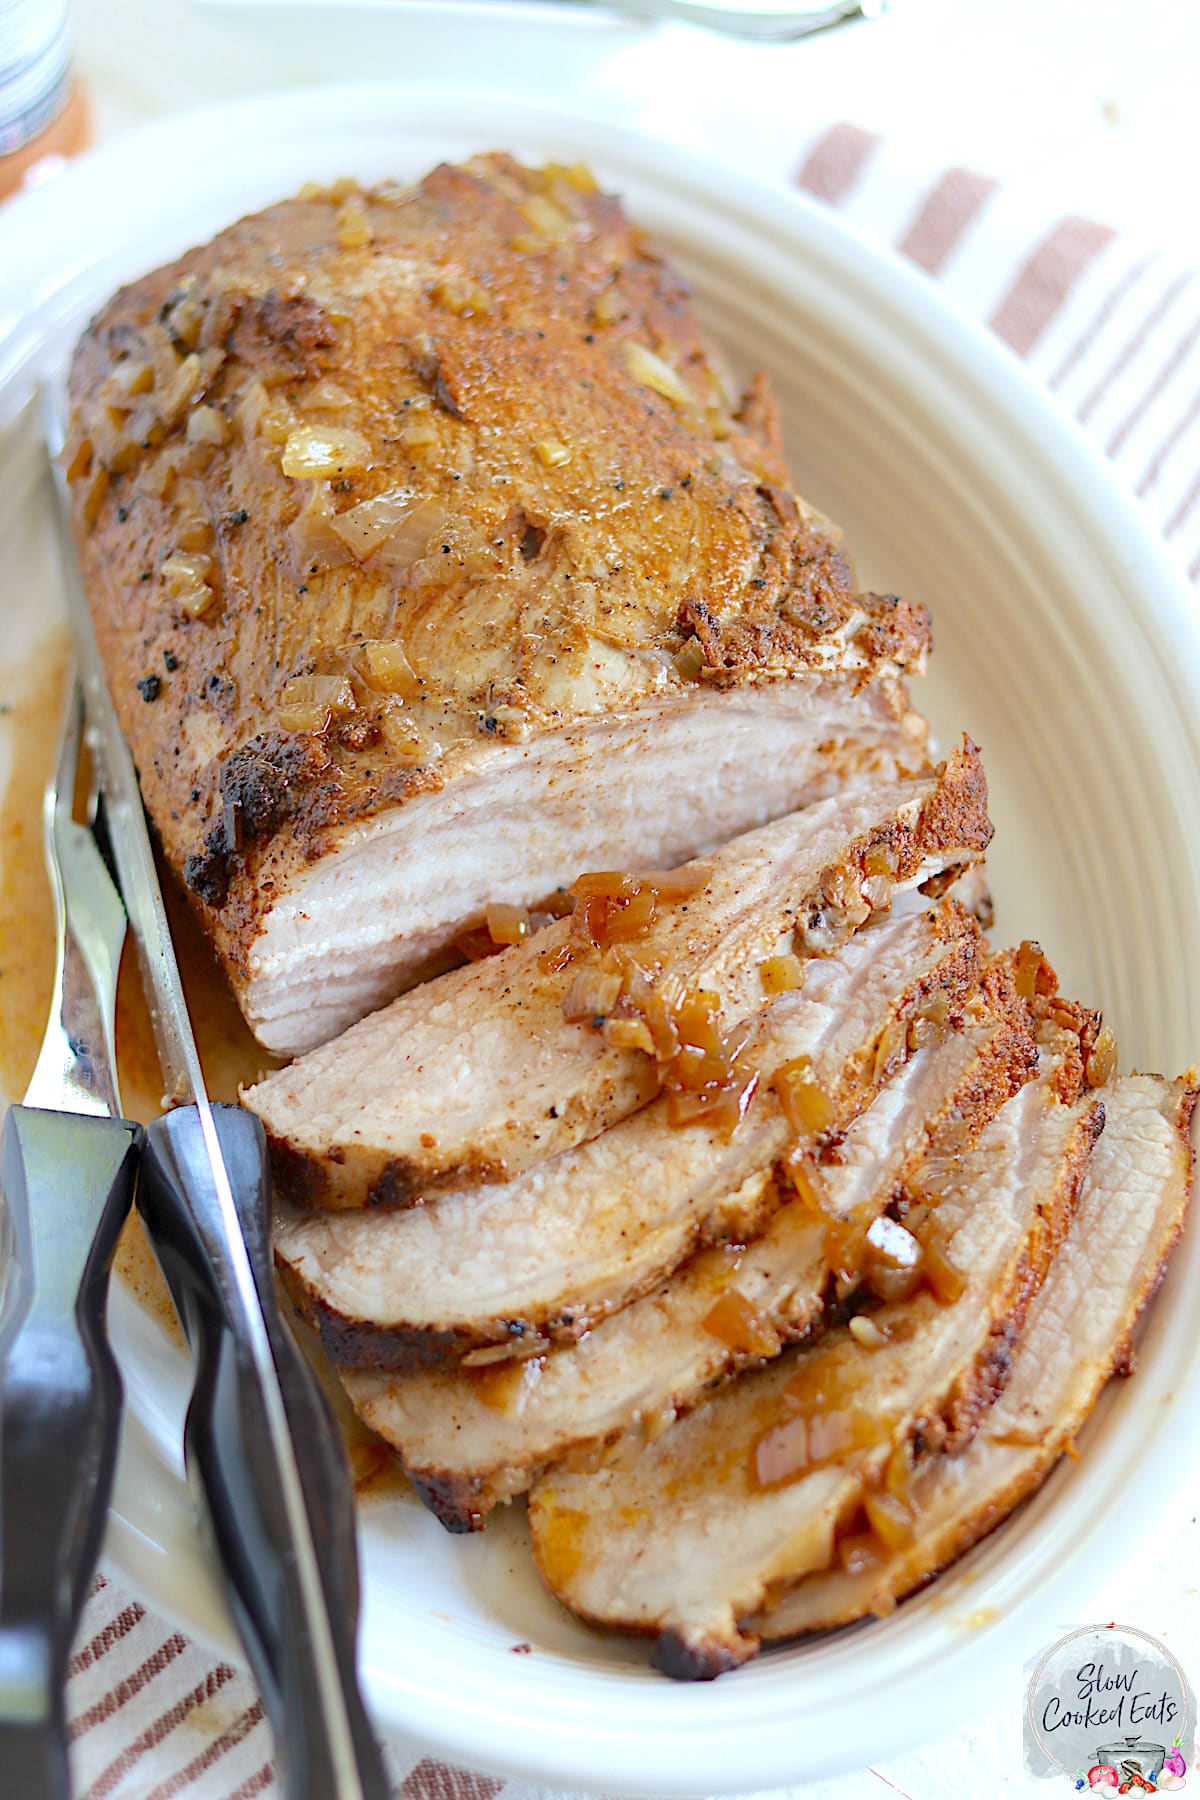 A juicy slow cooked and sliced pork loin on an oval white plate.